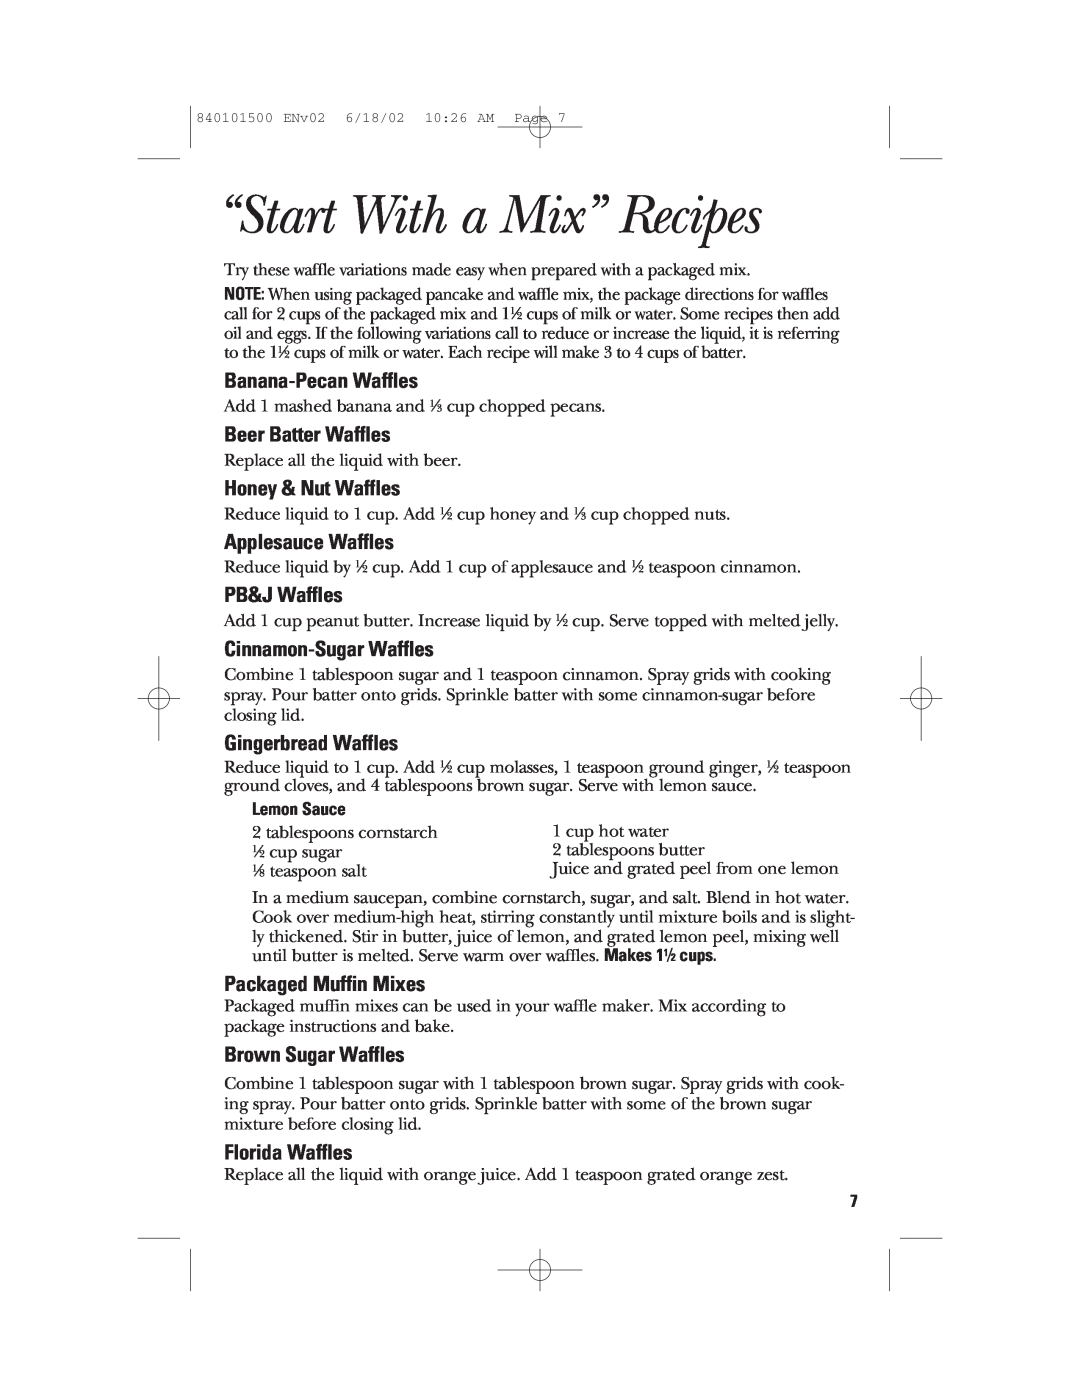 GE 840101500 manual “Start With a Mix” Recipes 